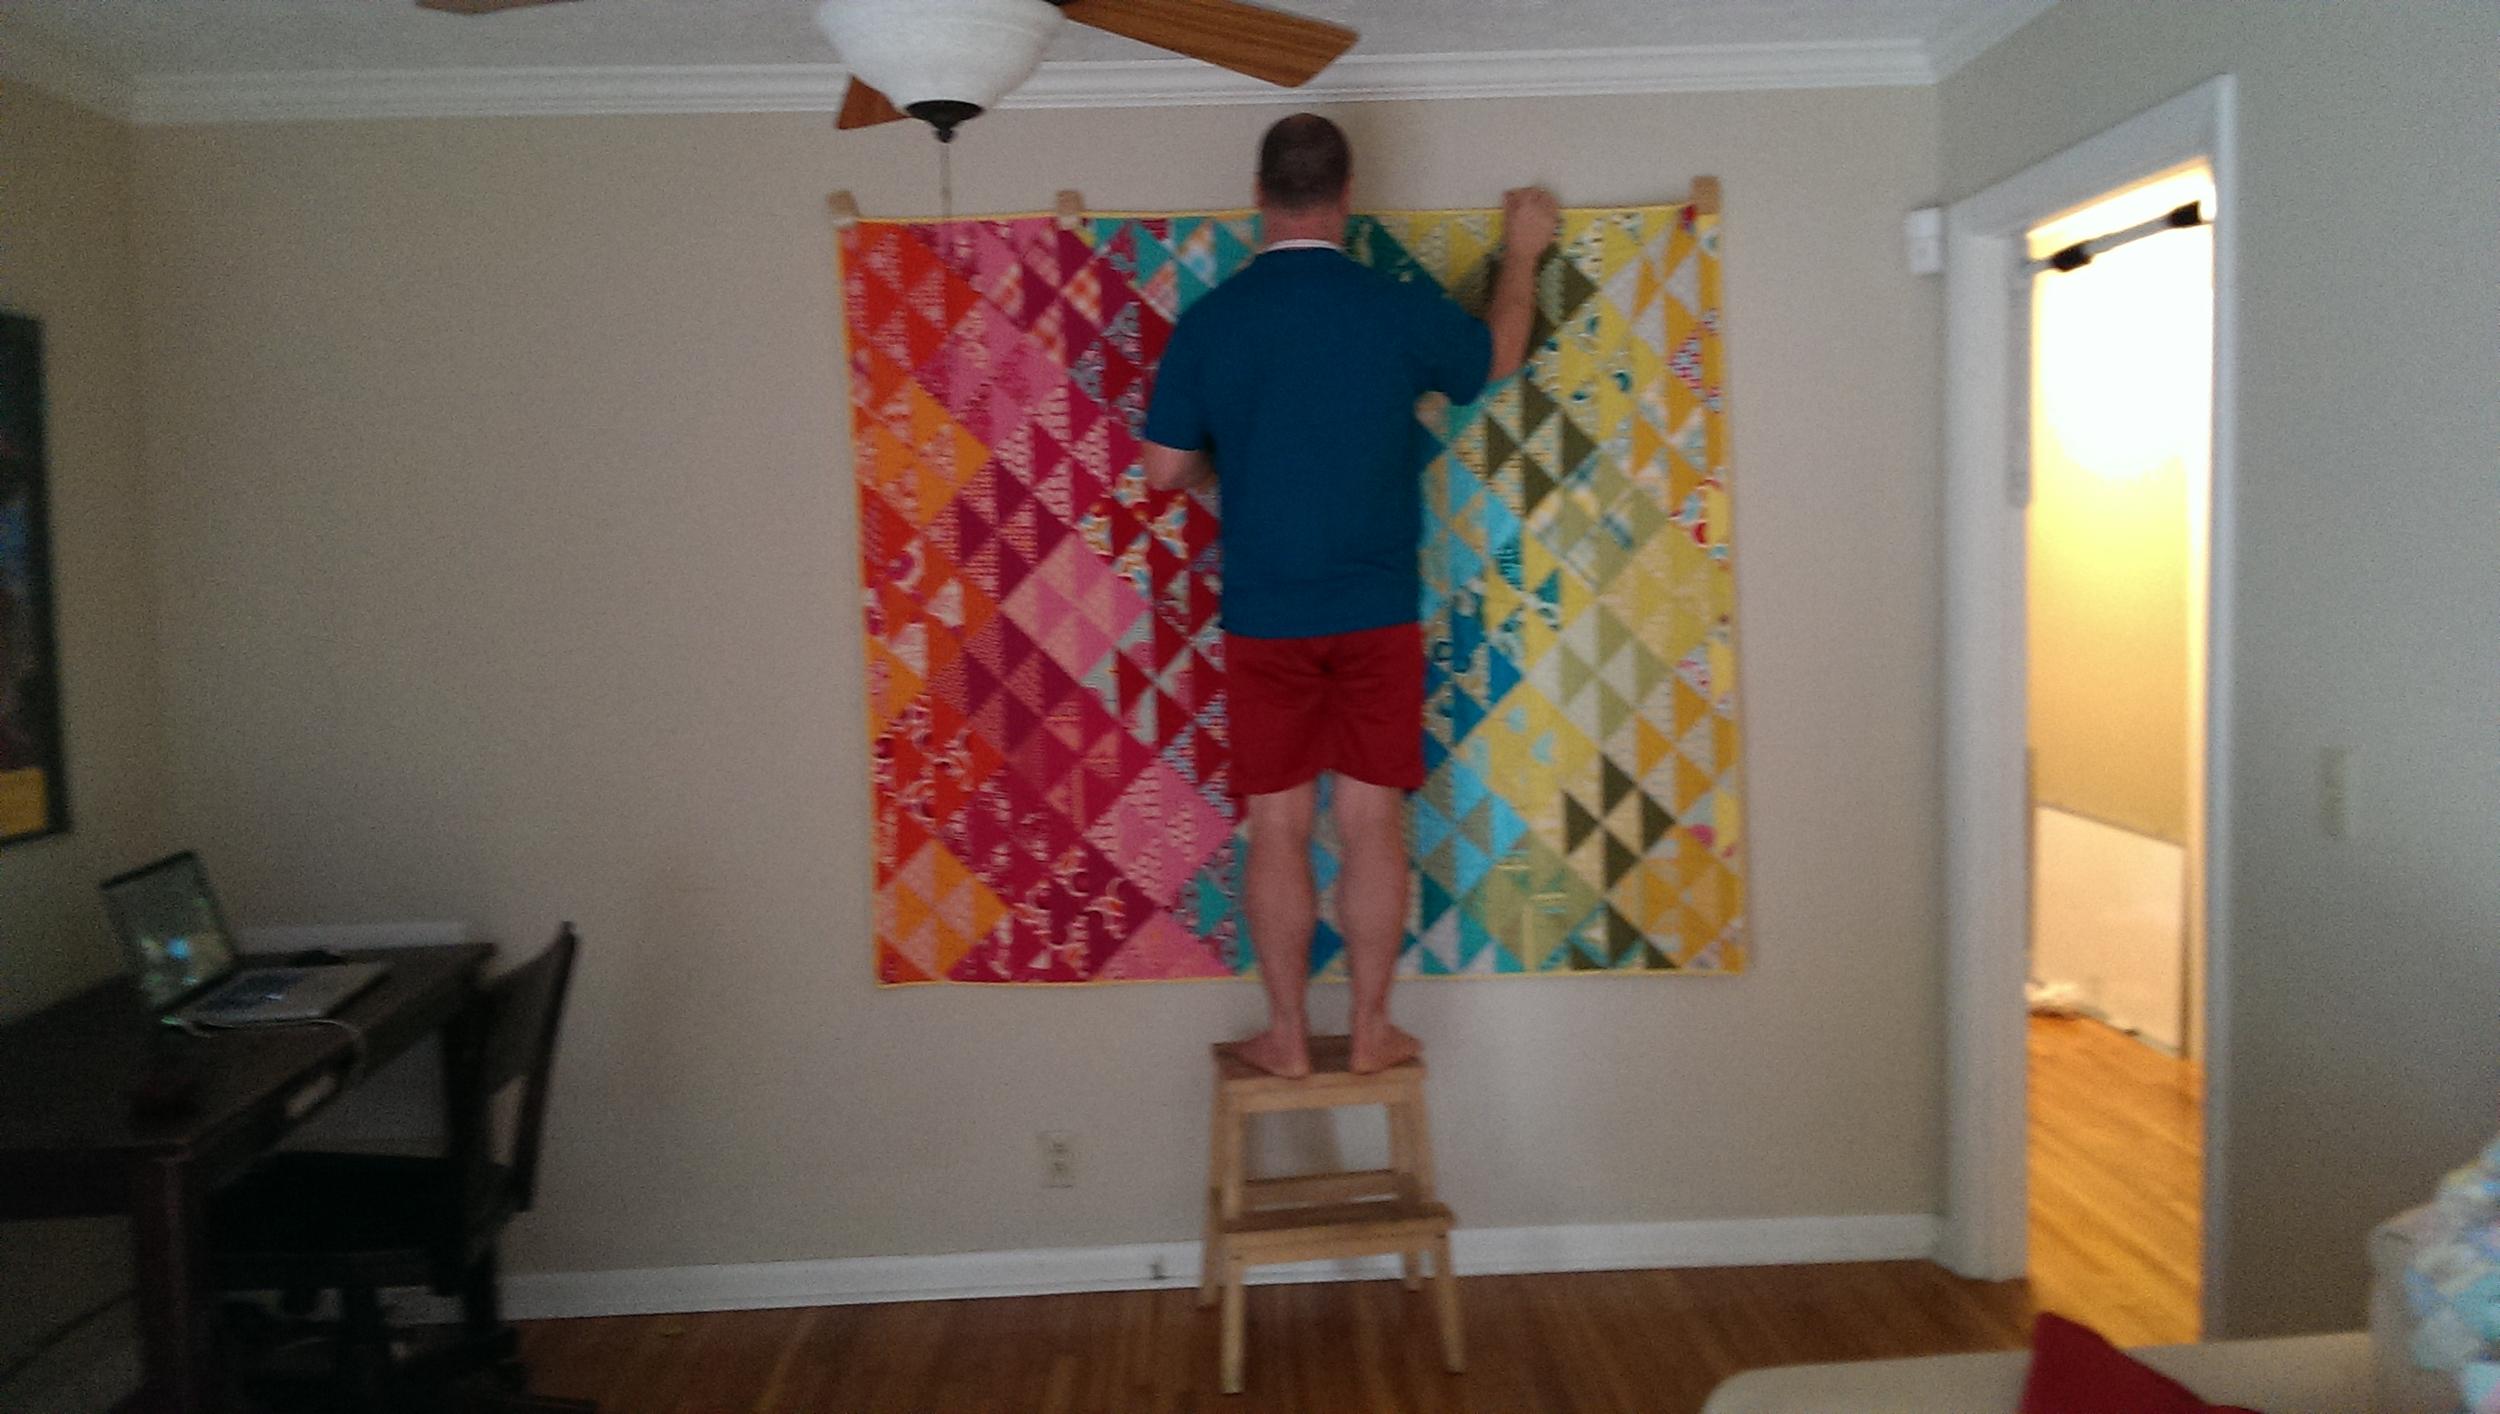 We hung our new quilt, made by the Amazing April.